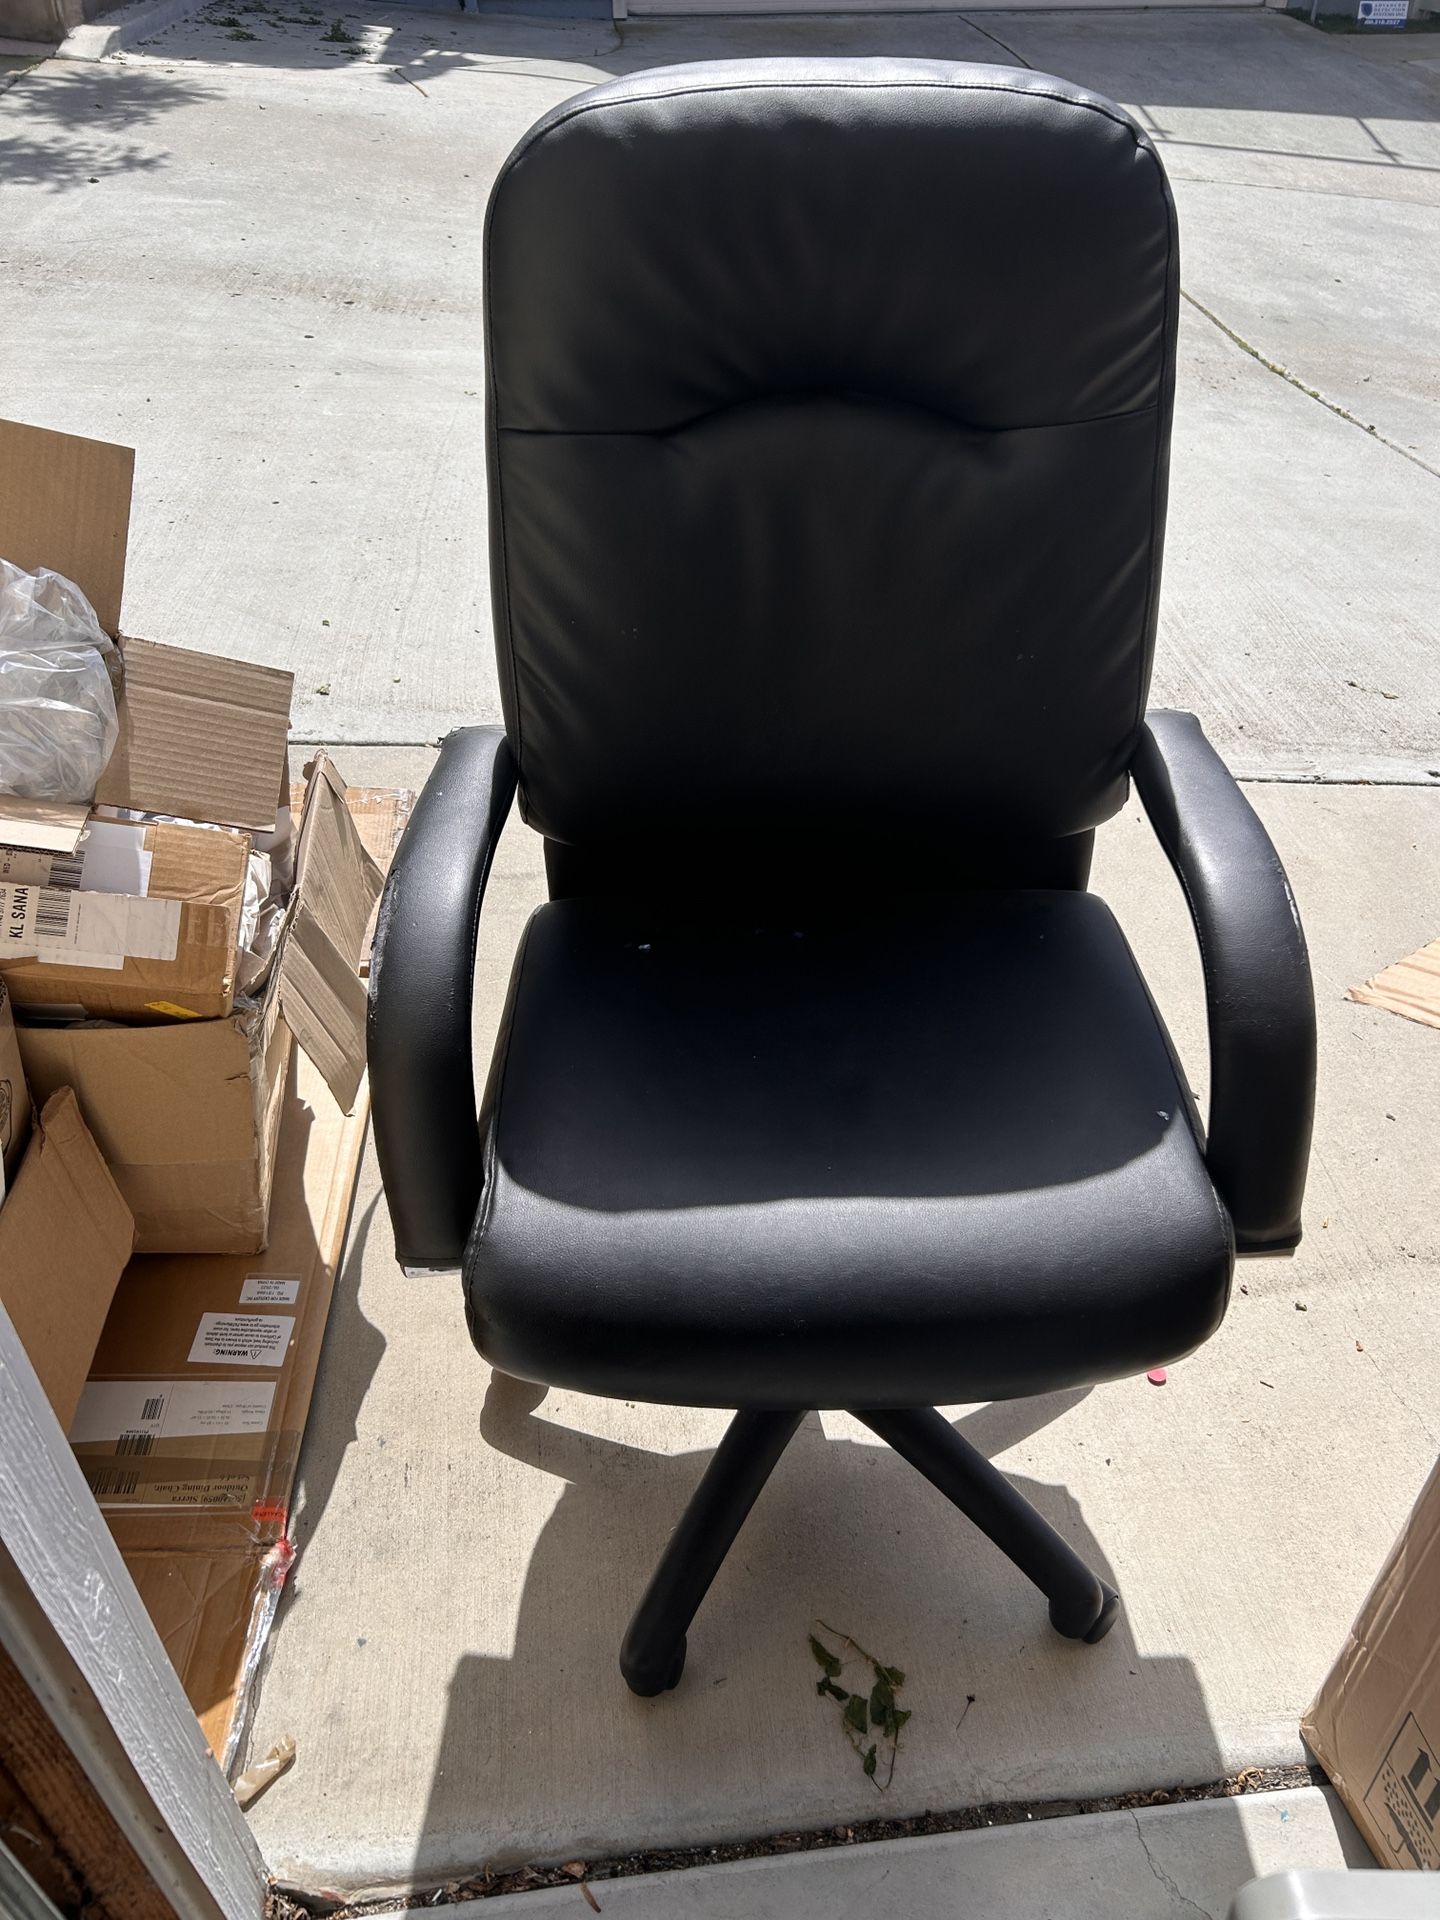 Free Office Chair 